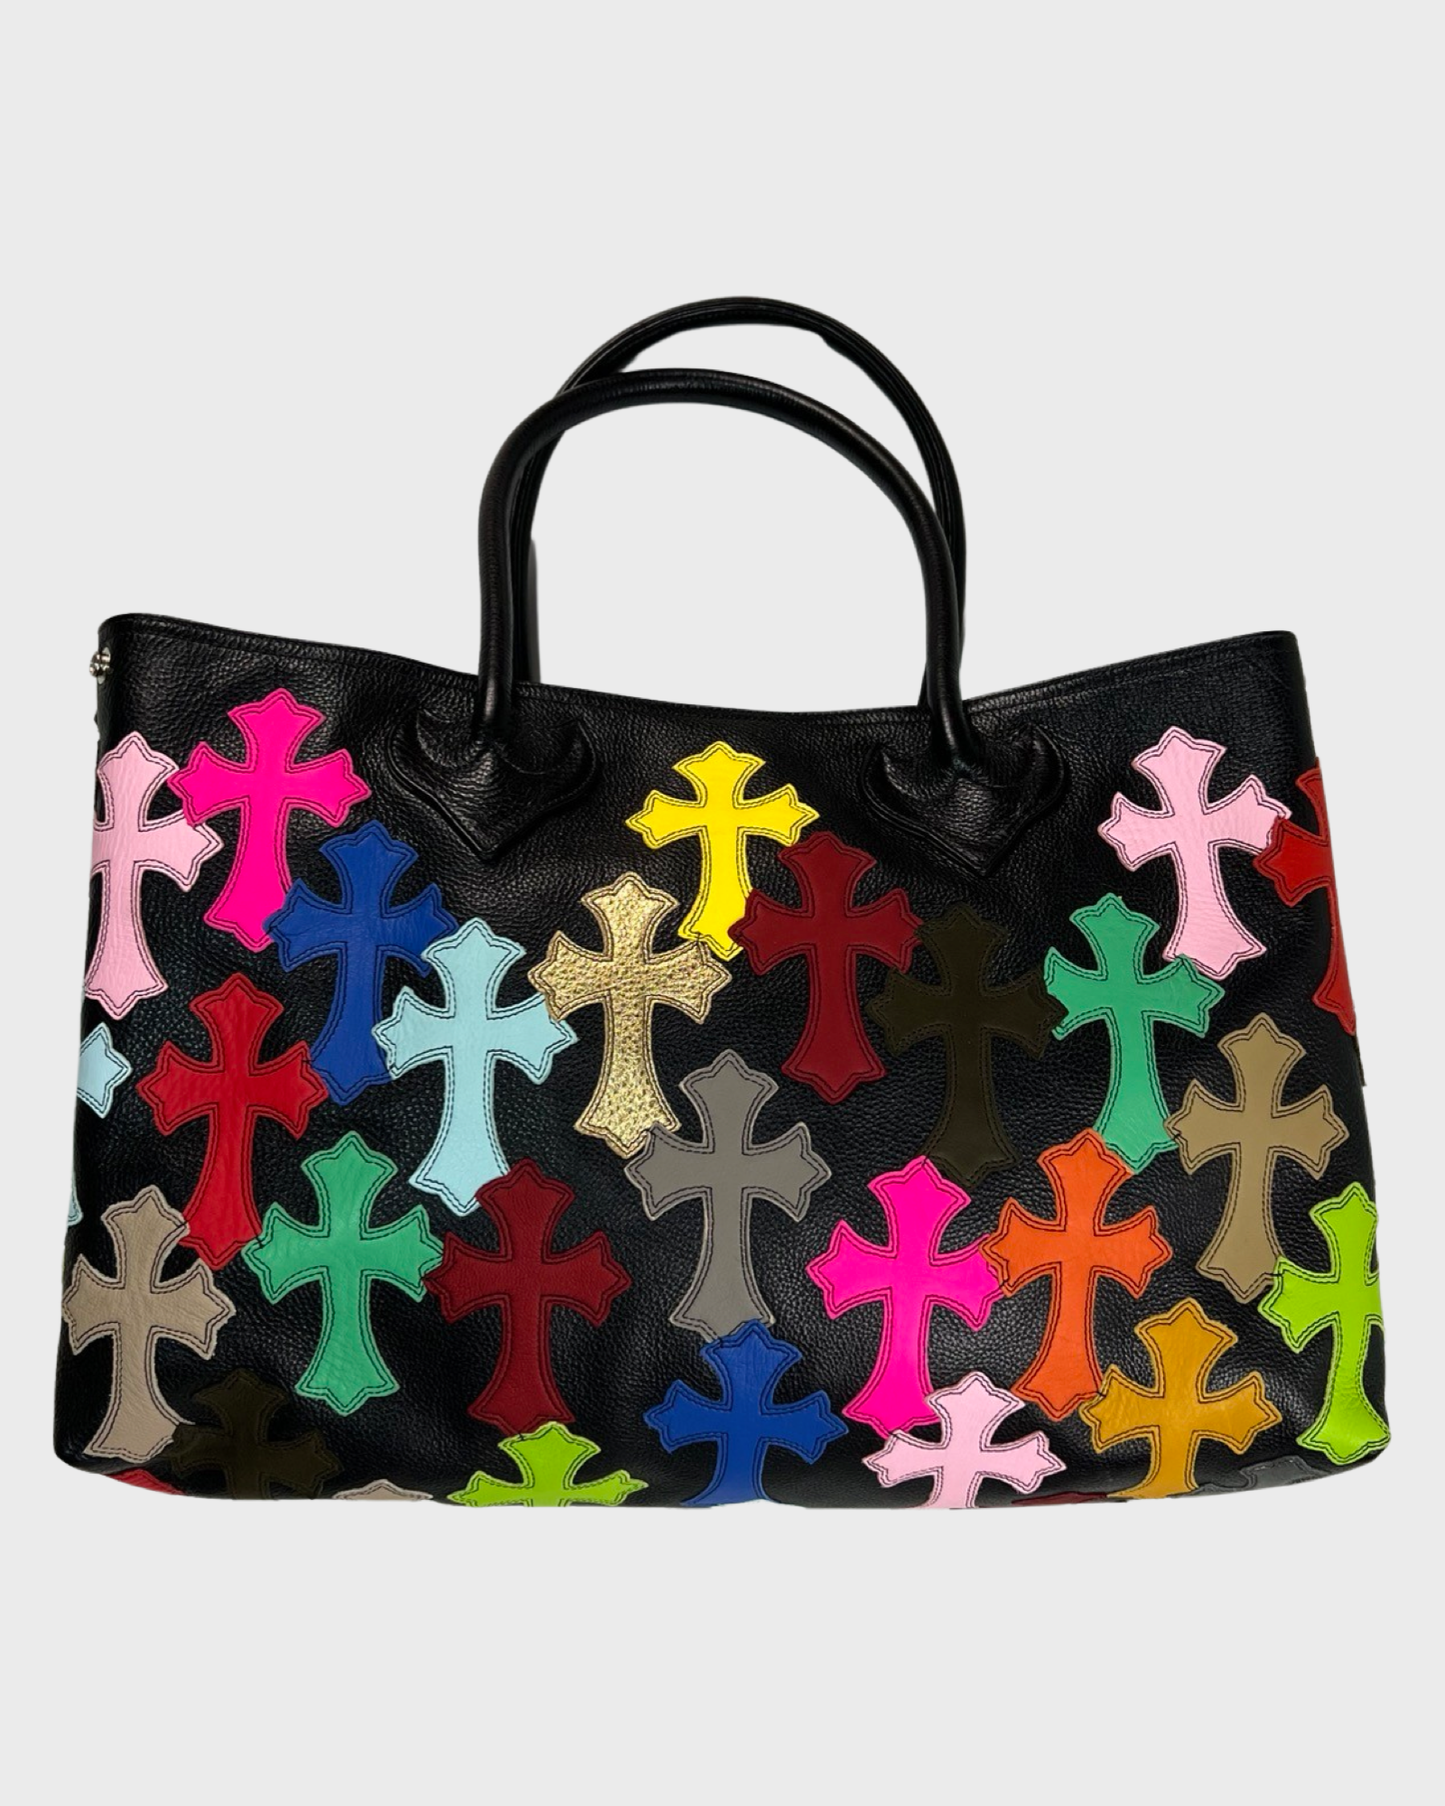 Chrome Hearts special order multi colored cross patched tote Bag SZ:OS